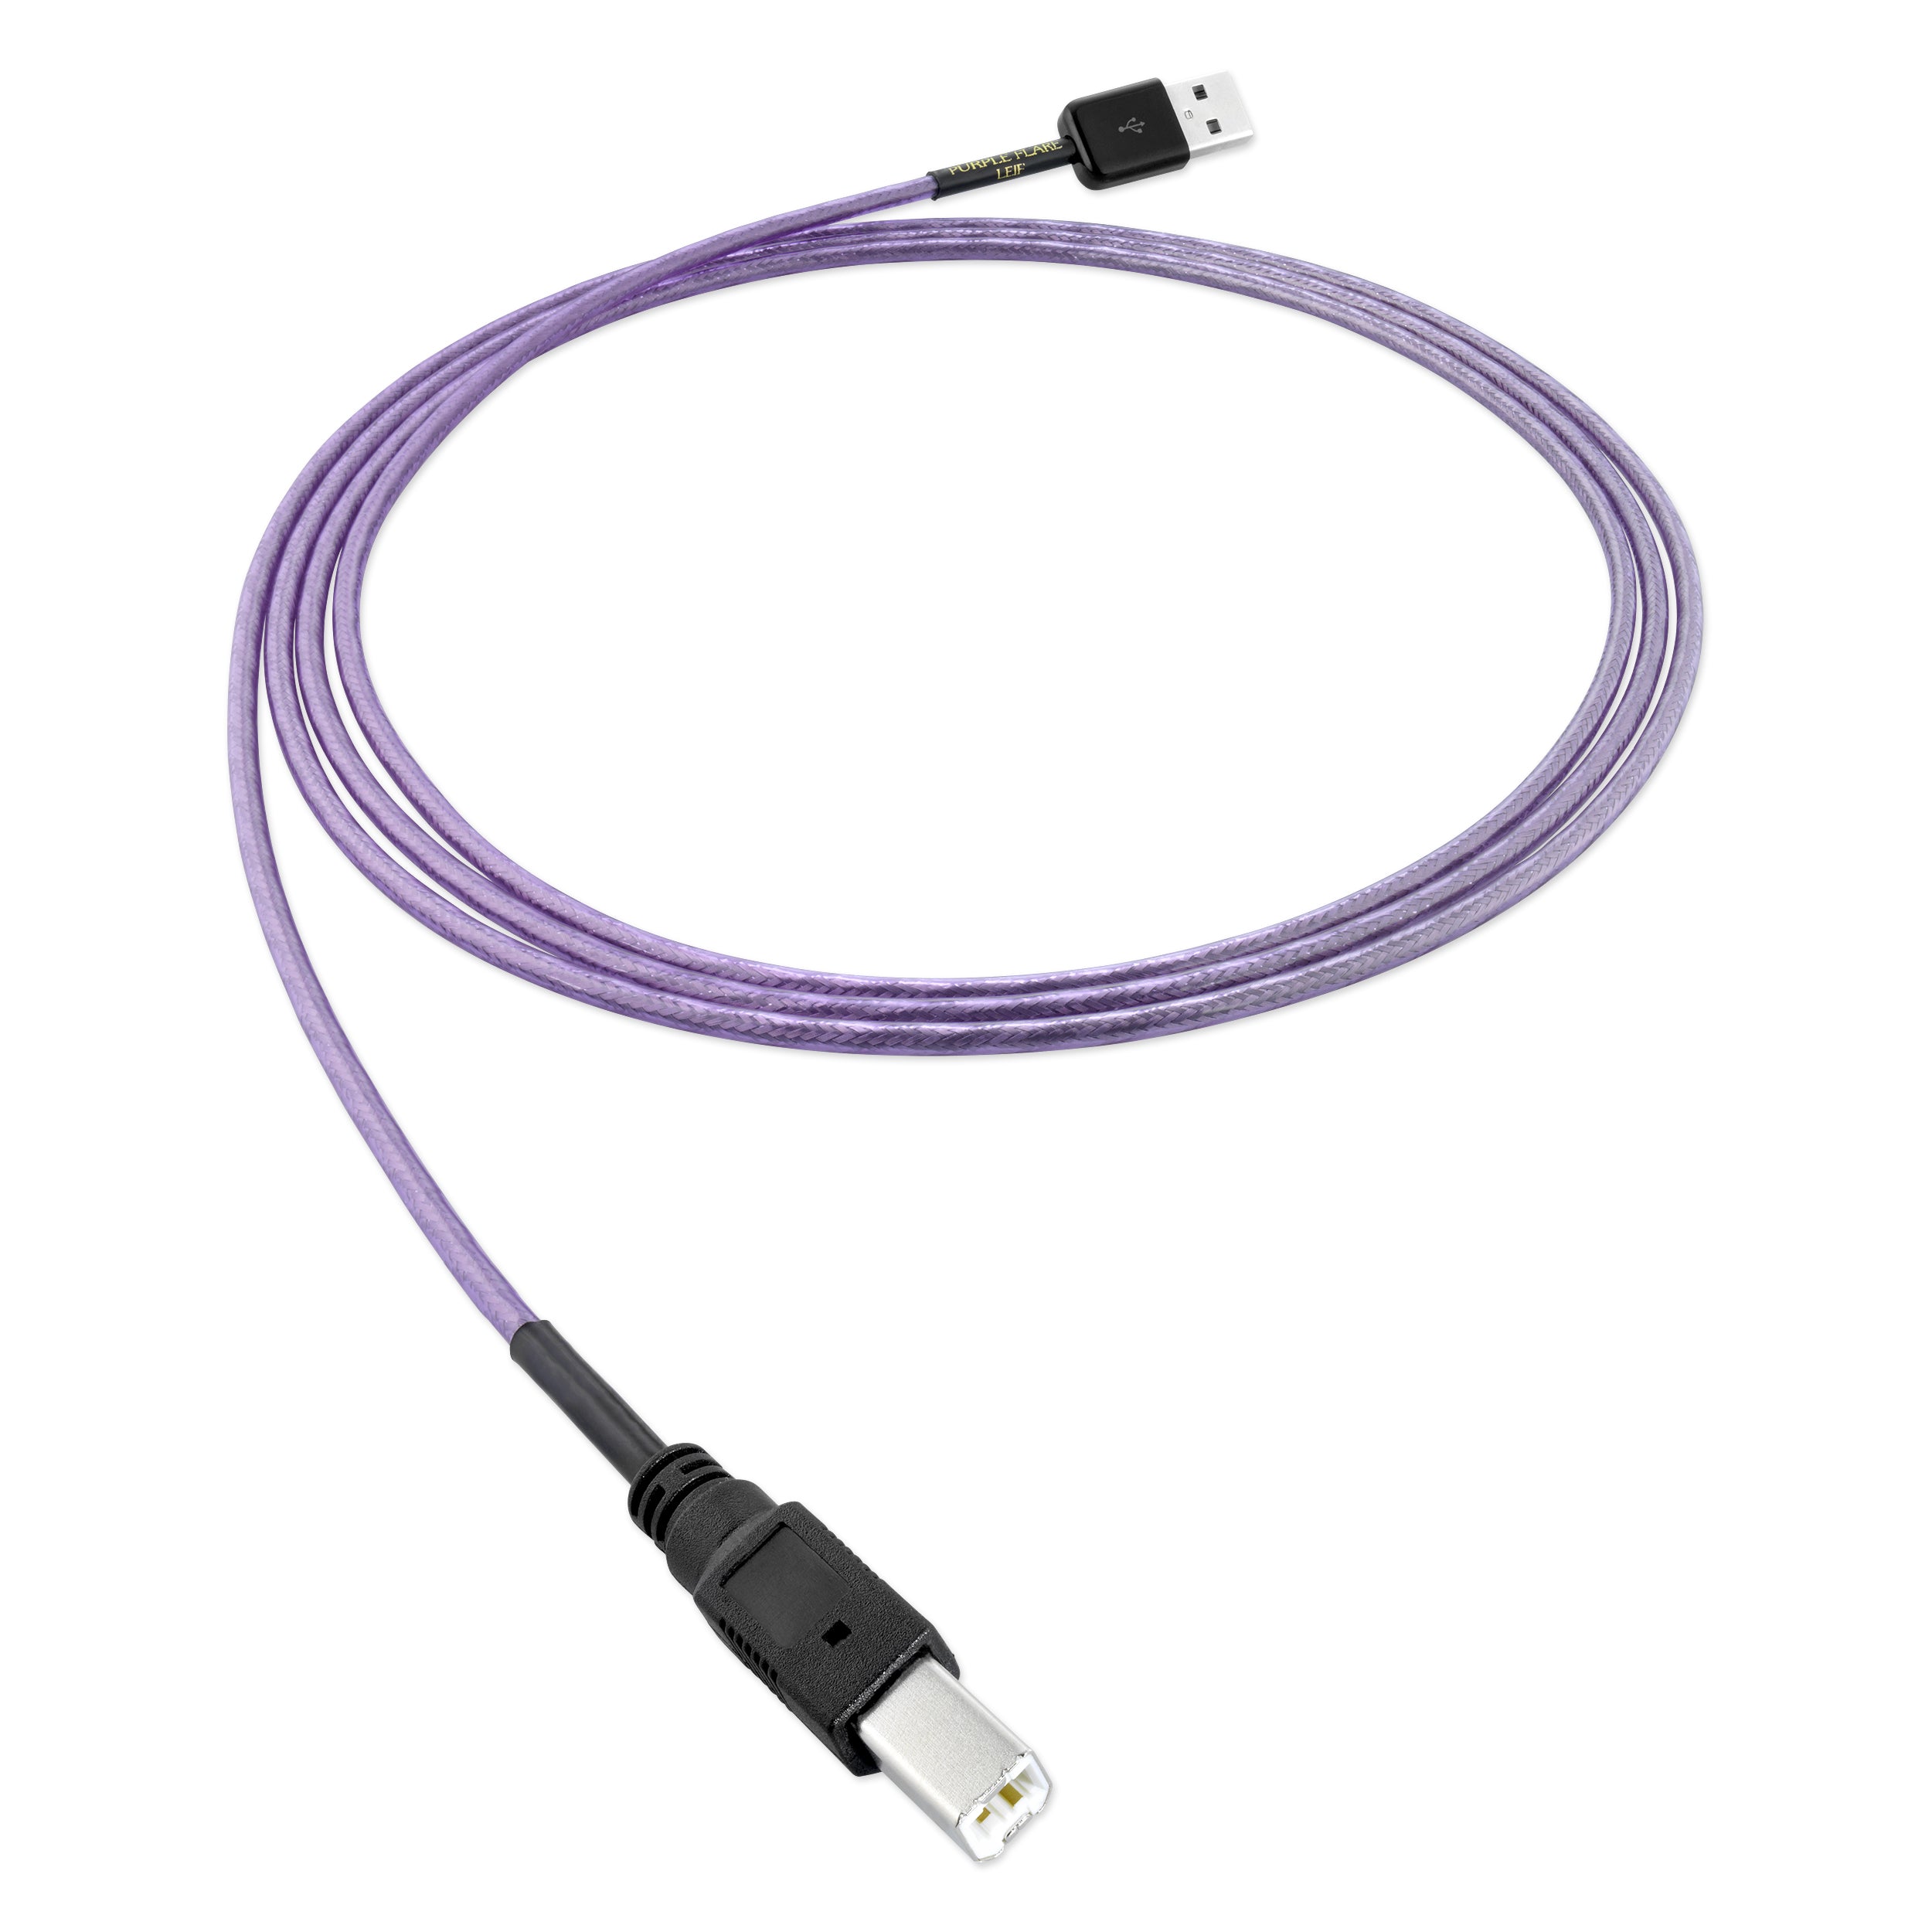 Nordost Leif Purple Flare USB 2.0 Cable